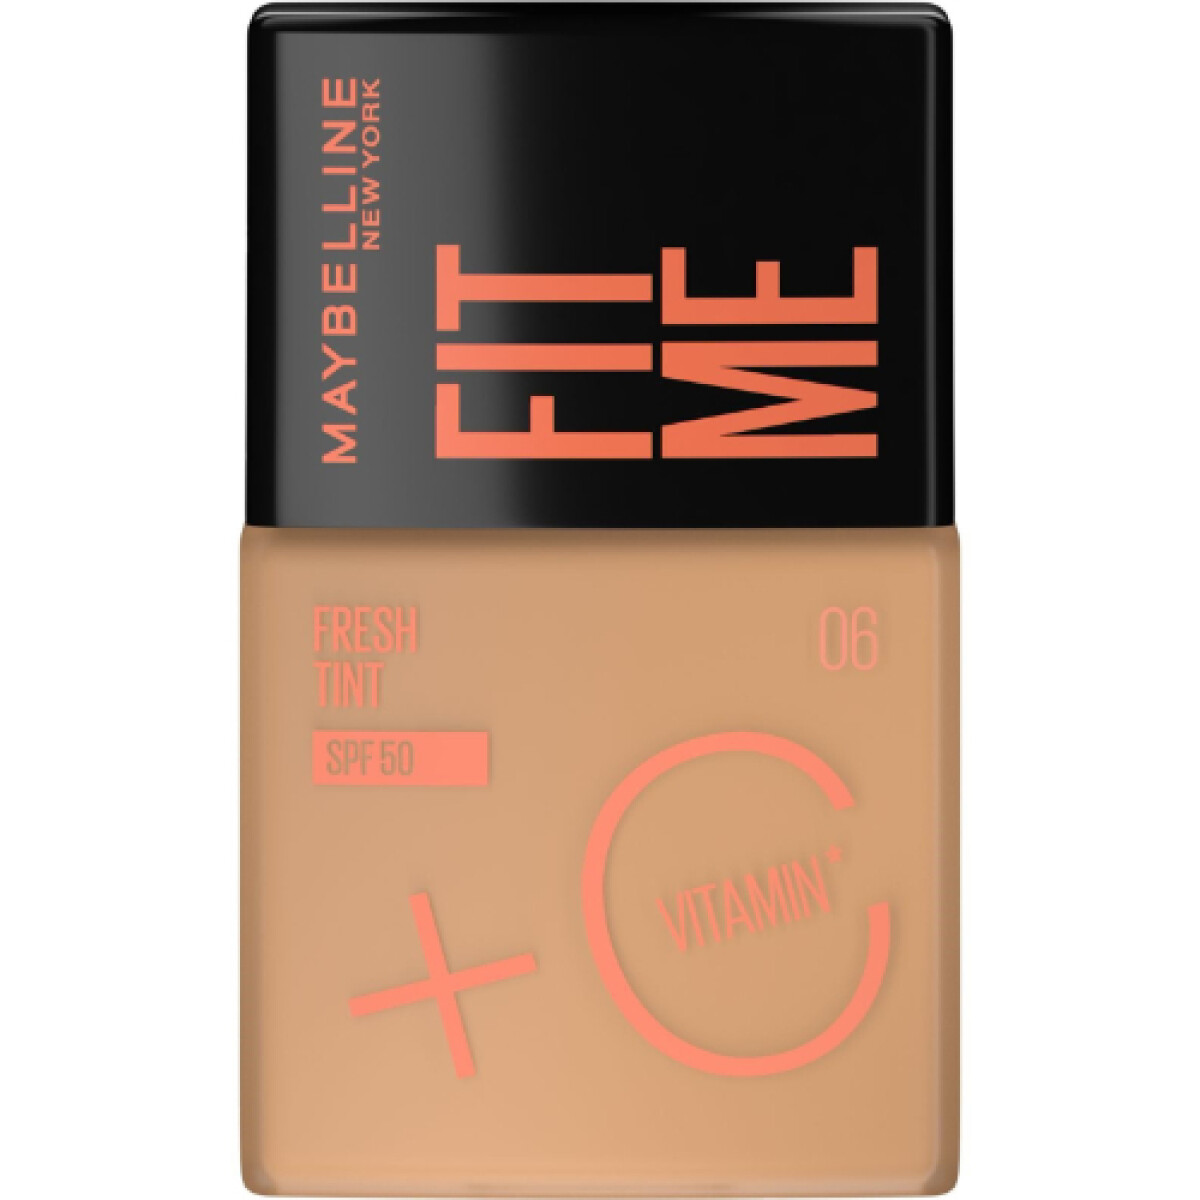 Maybelline Base Fit Me Fresh Tint Spf50 6 As X 1 Un 